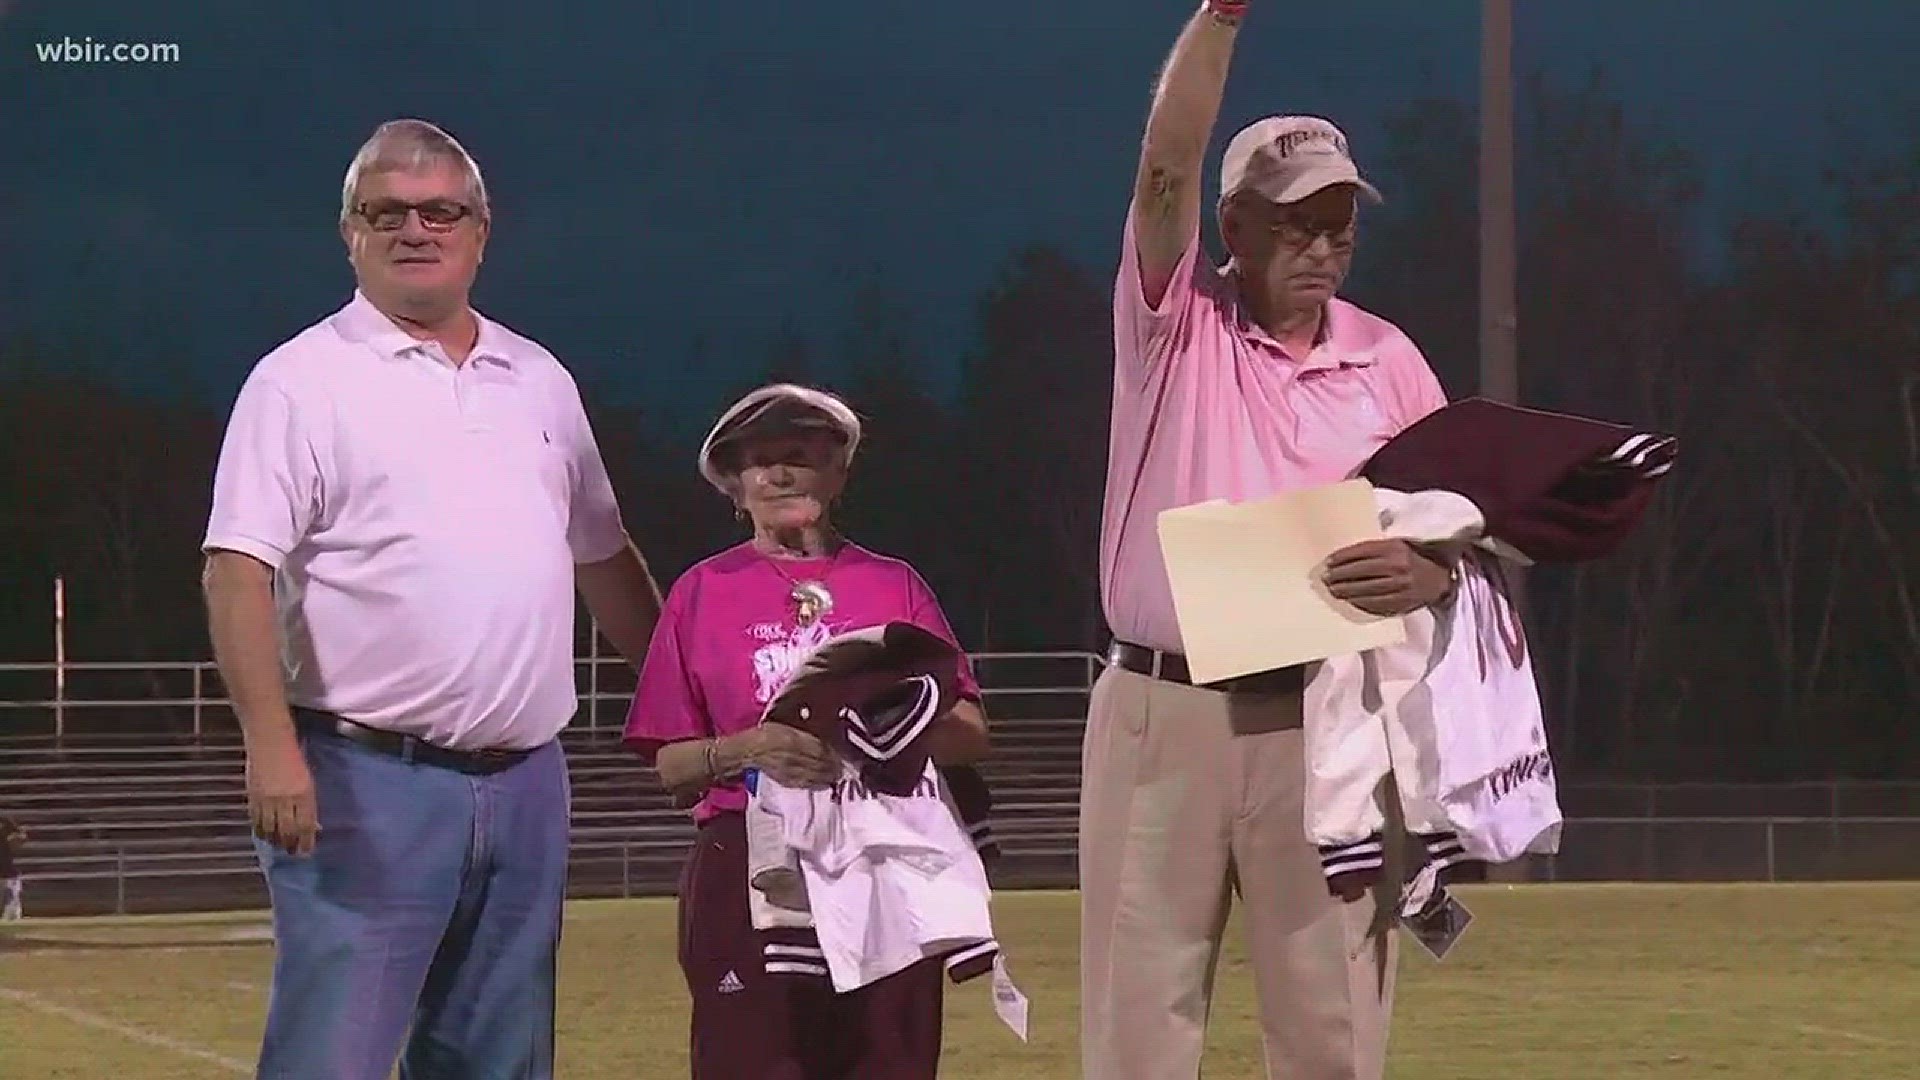 Tellico Plains head coach John Mulllinax has been coaching for more than 40 years and on Friday, he hit a coaching milestone.